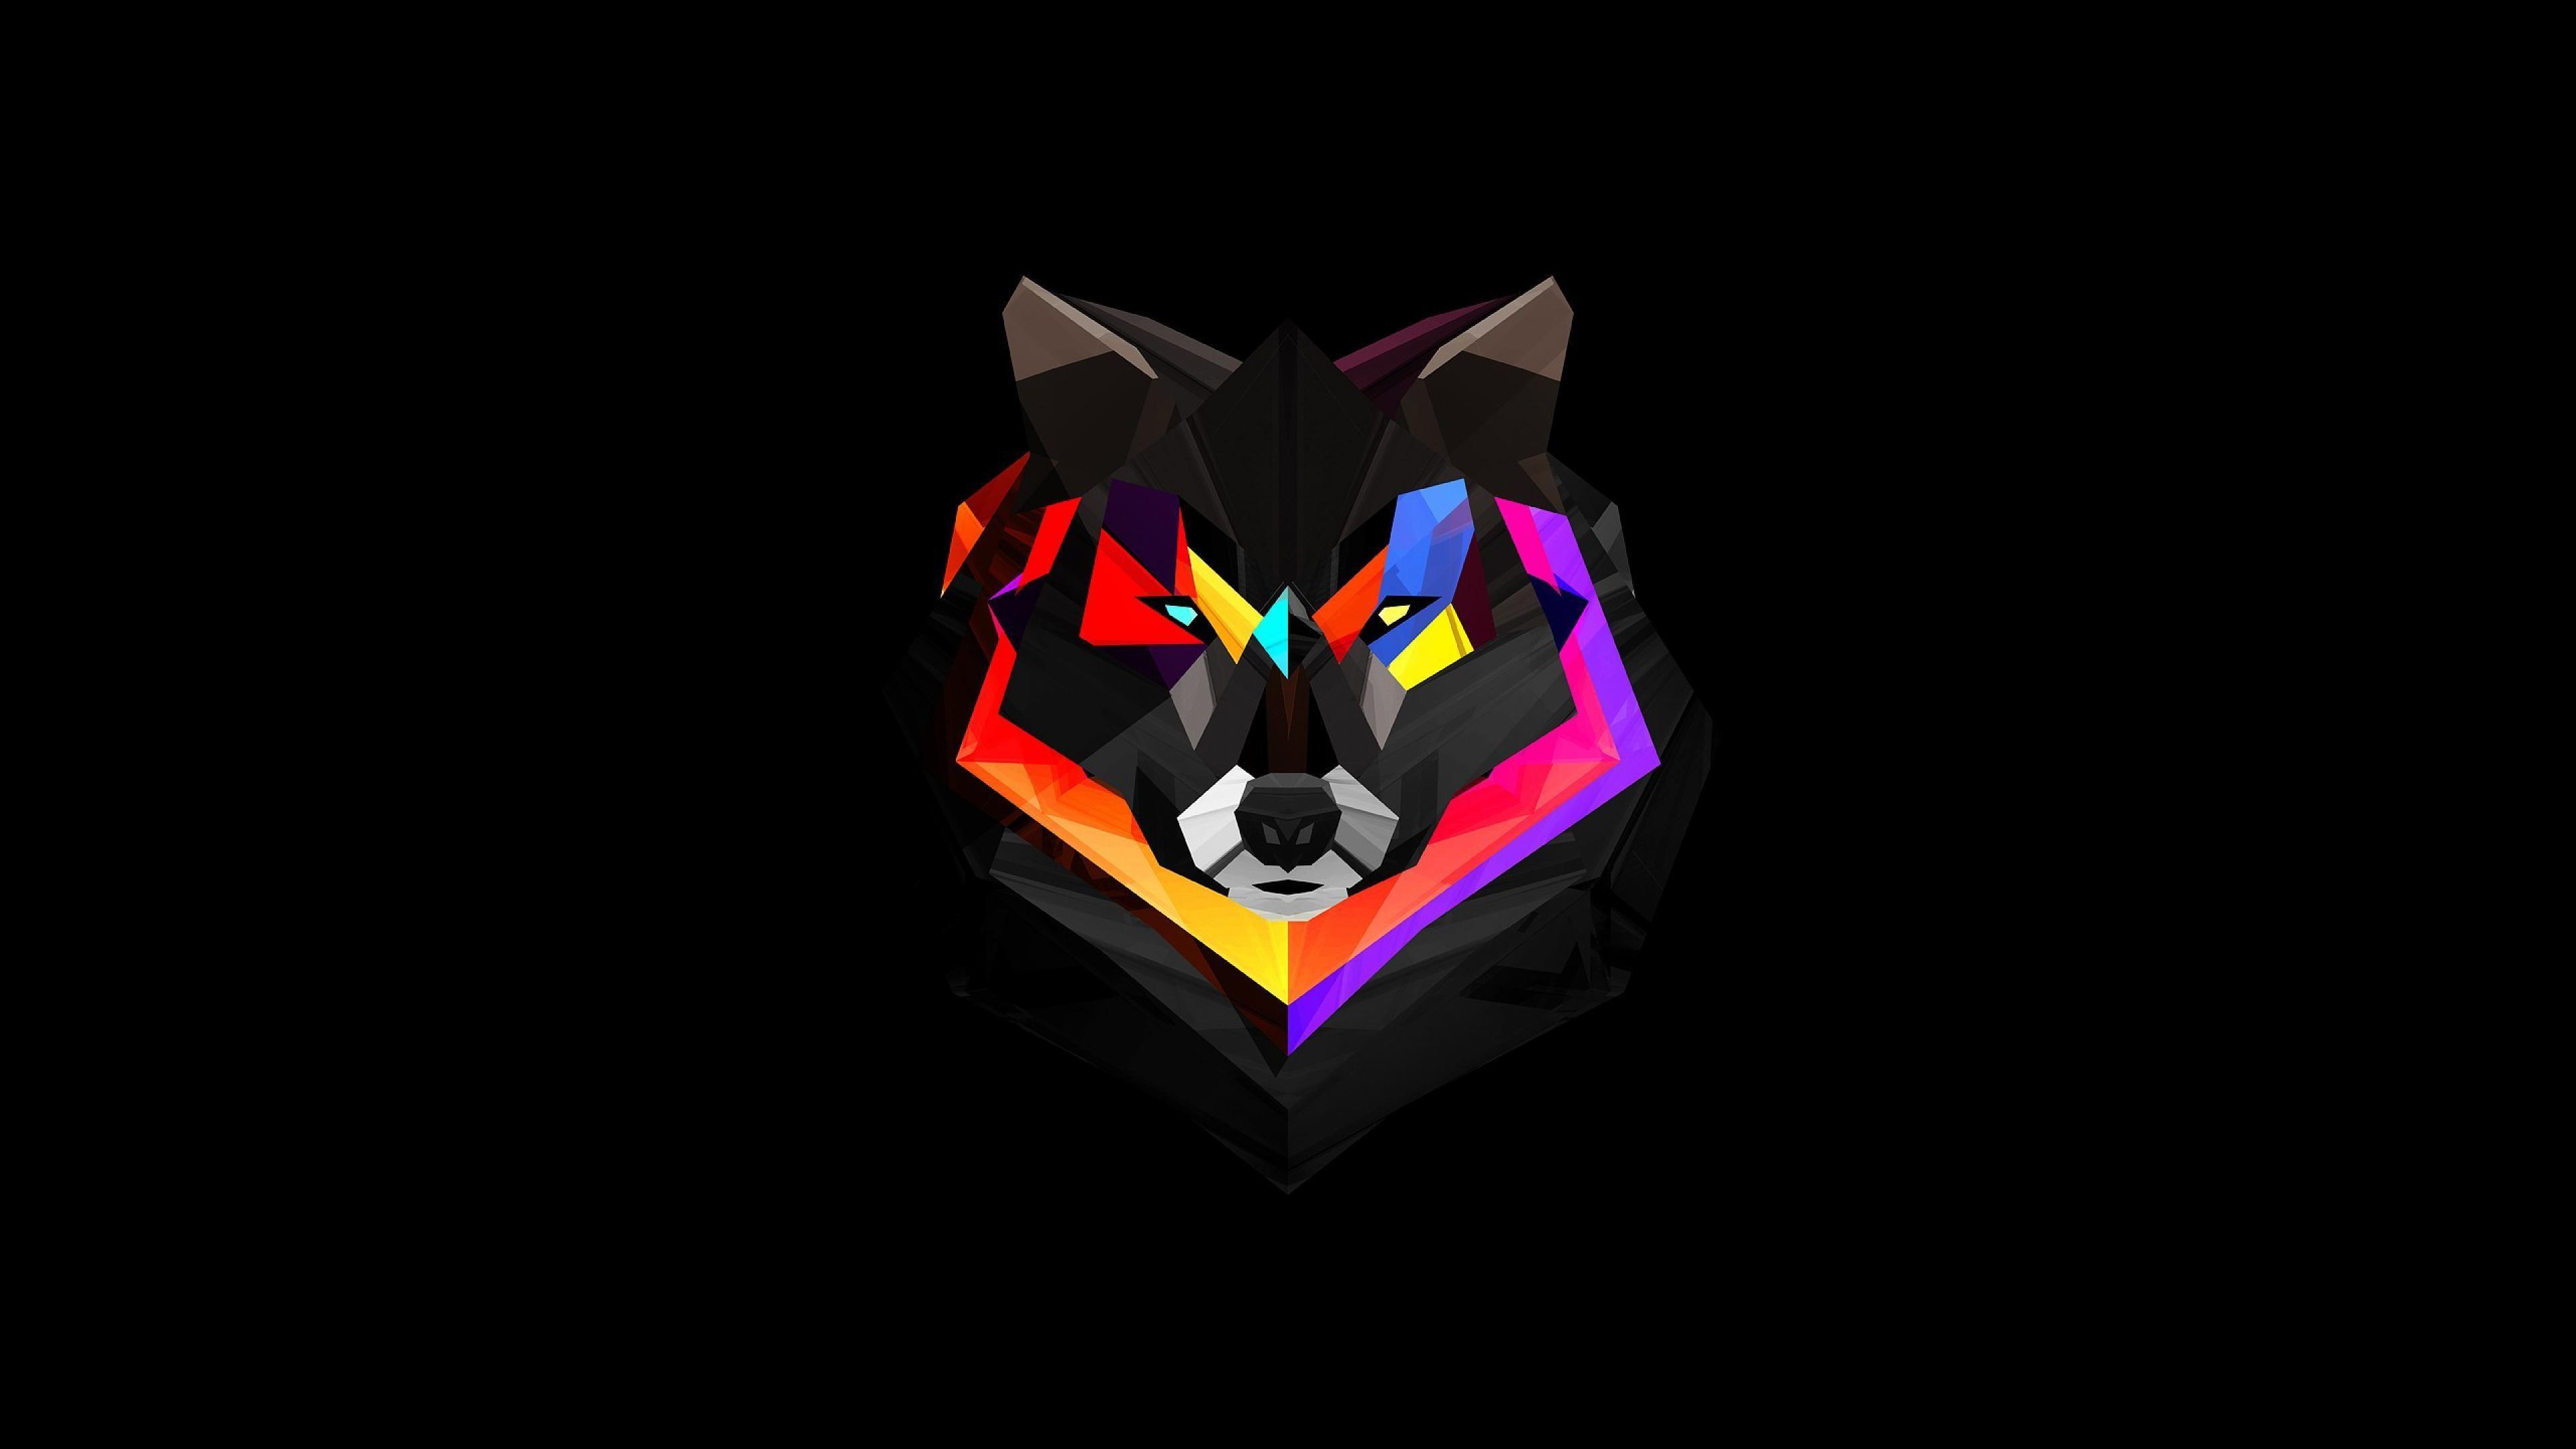 Colorful Wolf Logo - Abstract Colorful Wolf Face. Abstract Desktop Wallpaper